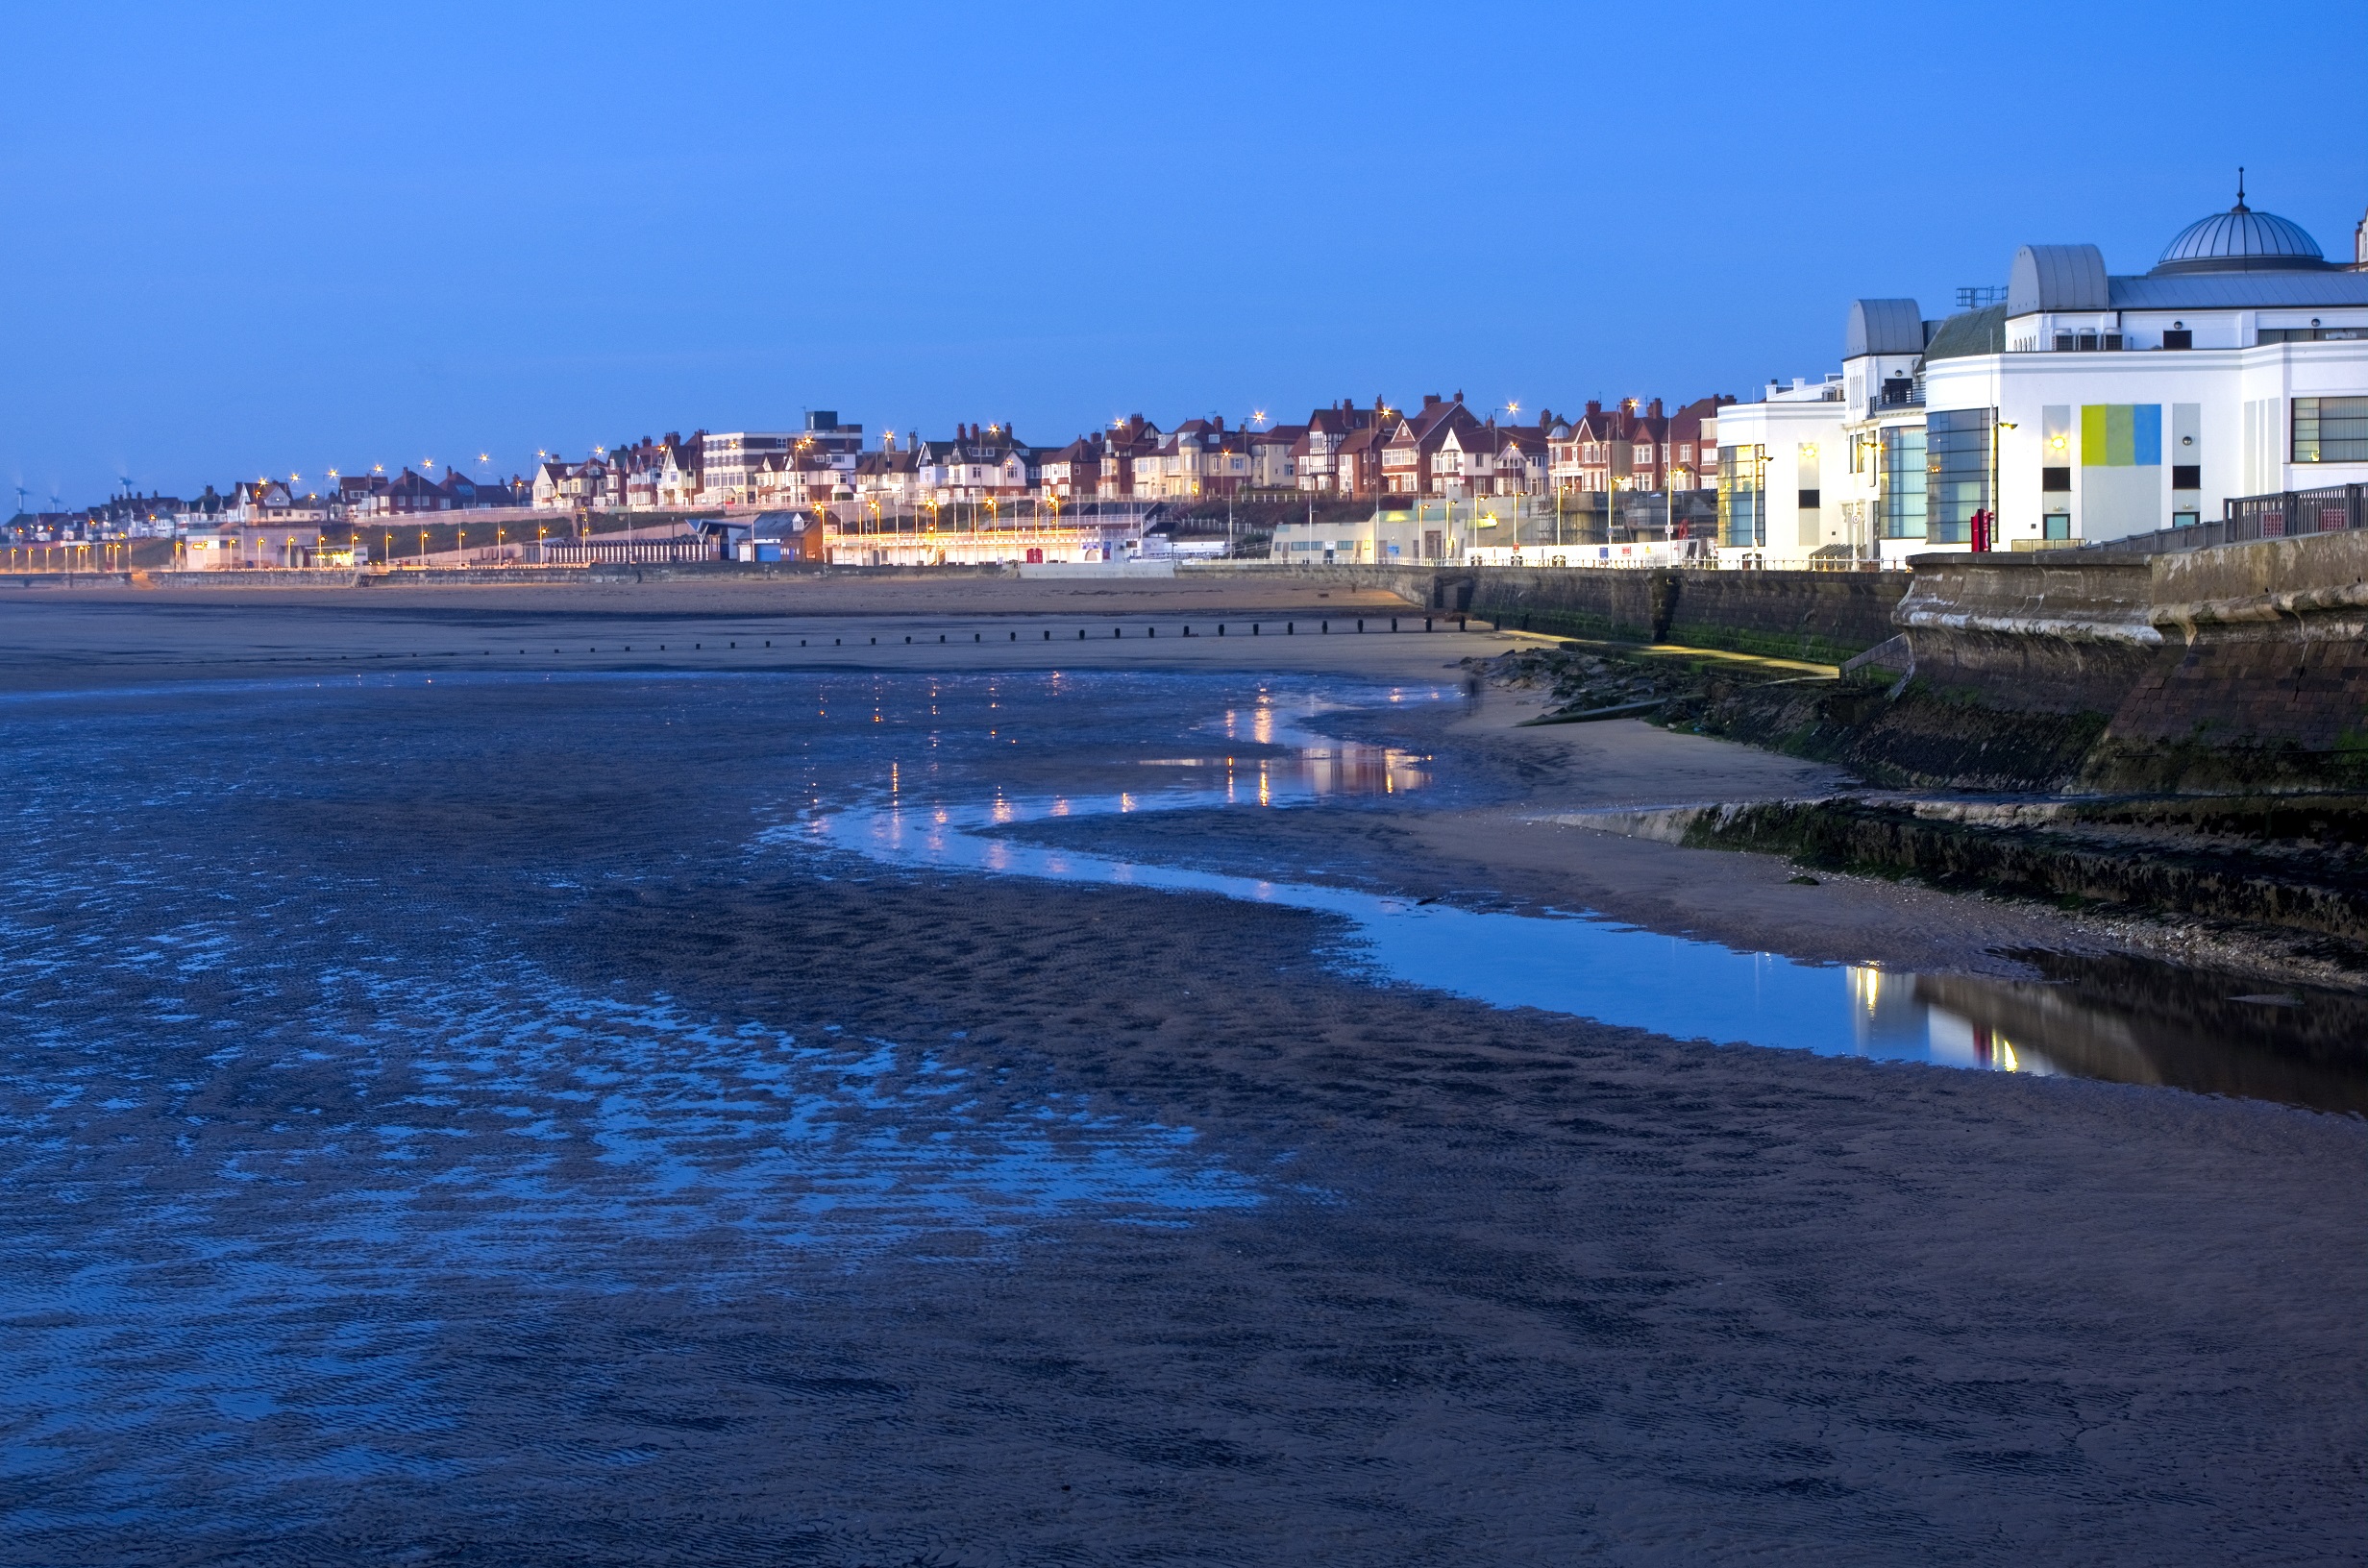 Bridlington Spa, East Riding in early evening.